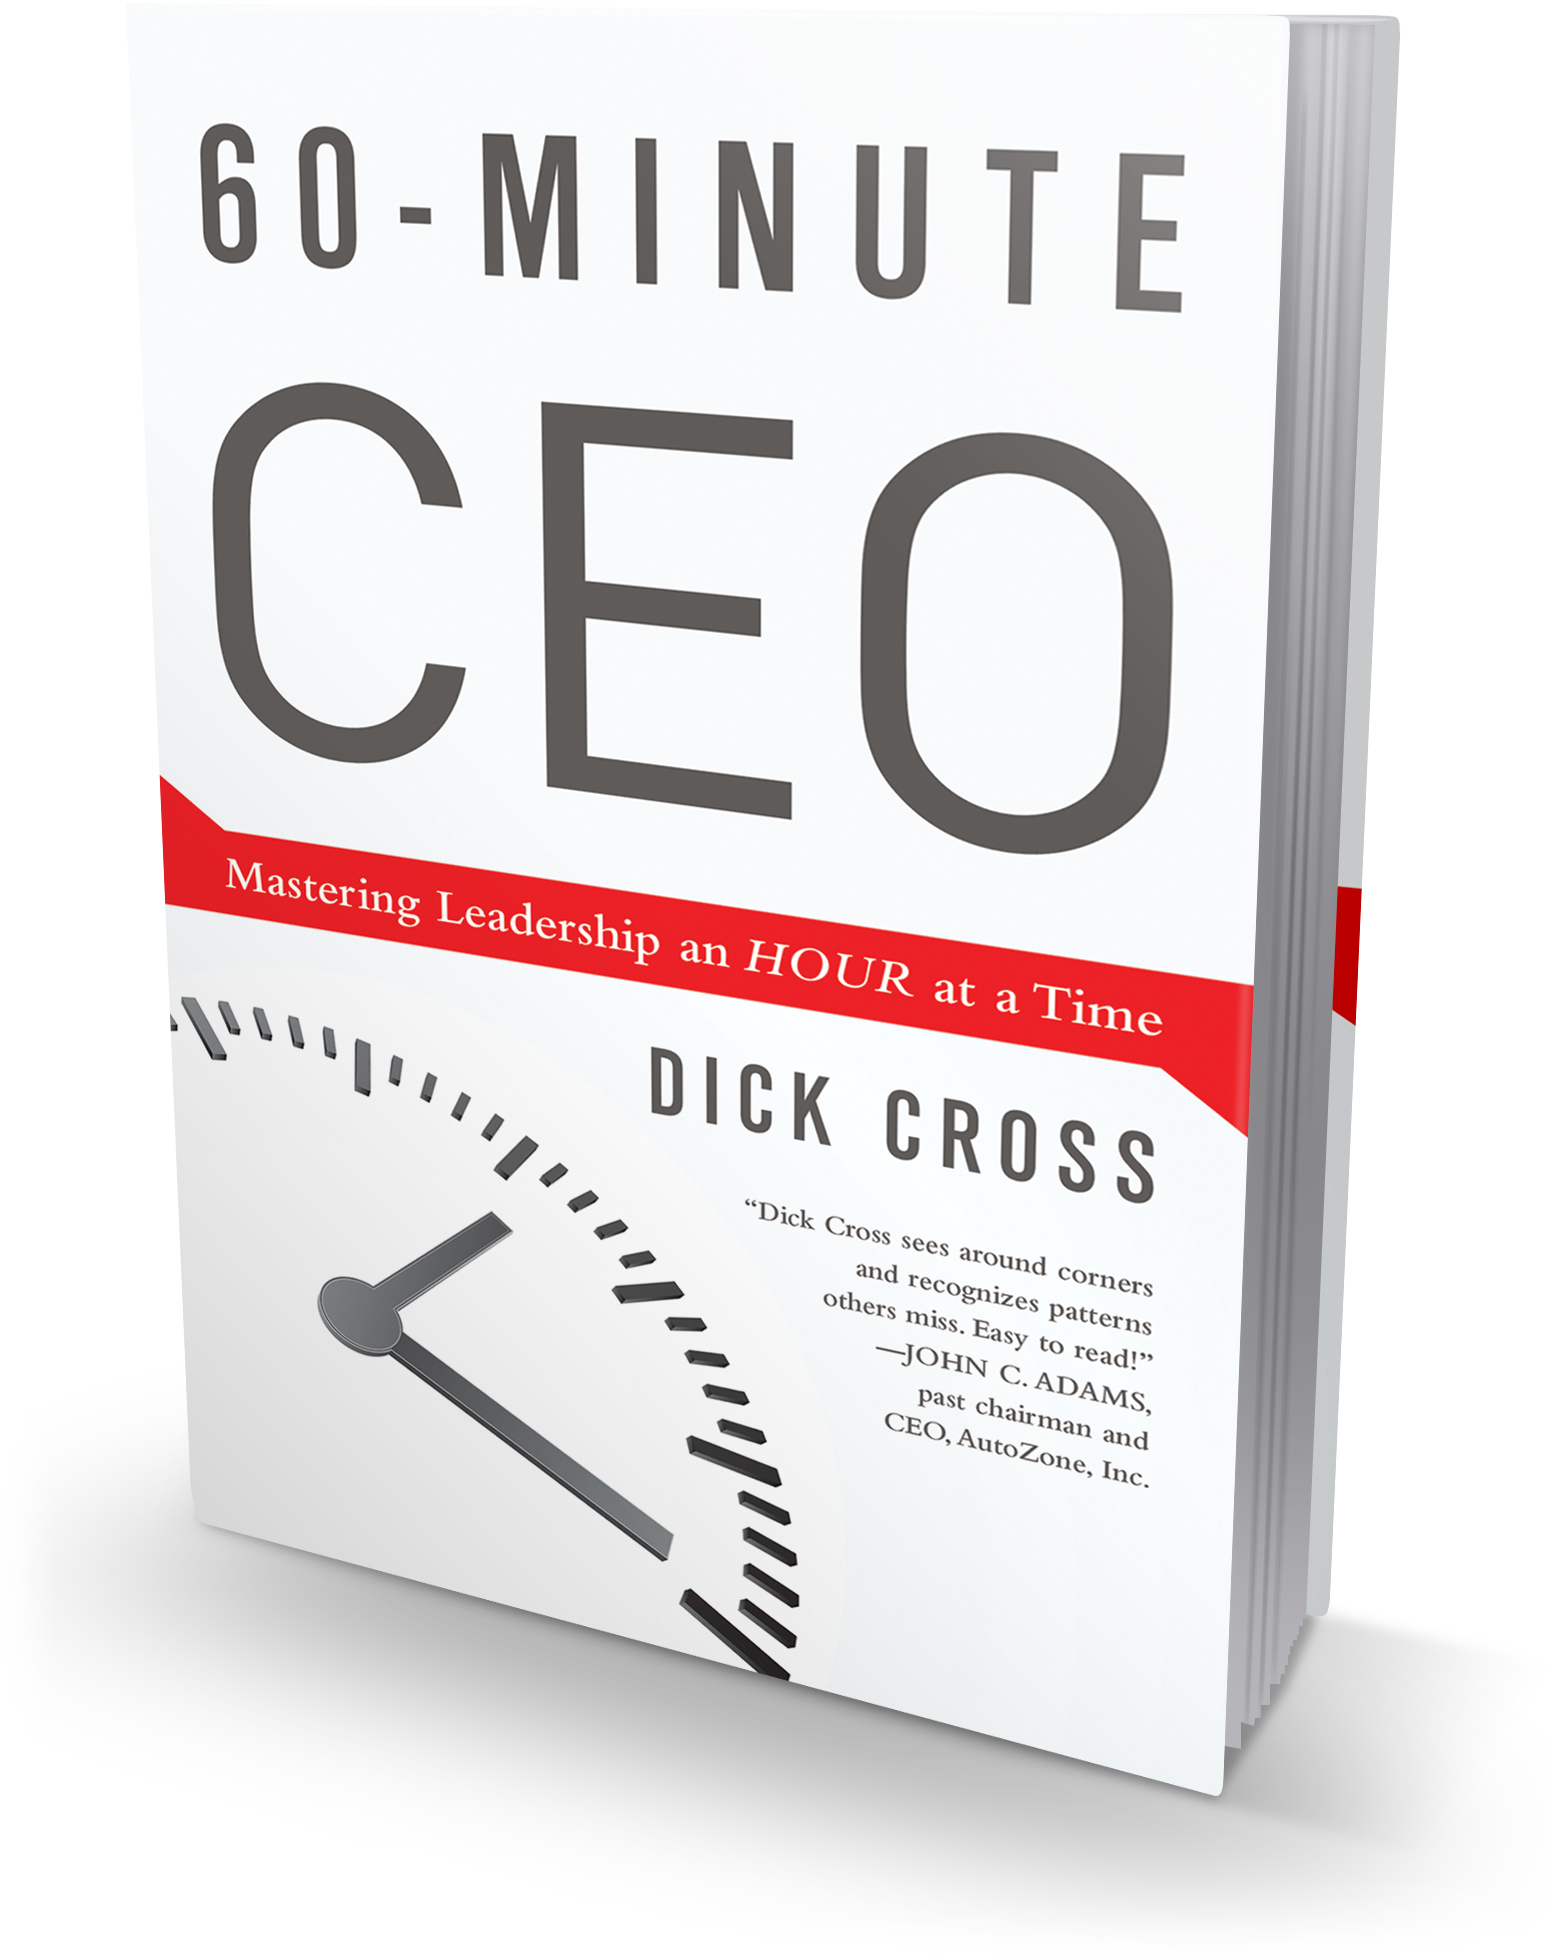 60-Minute CEO book cover